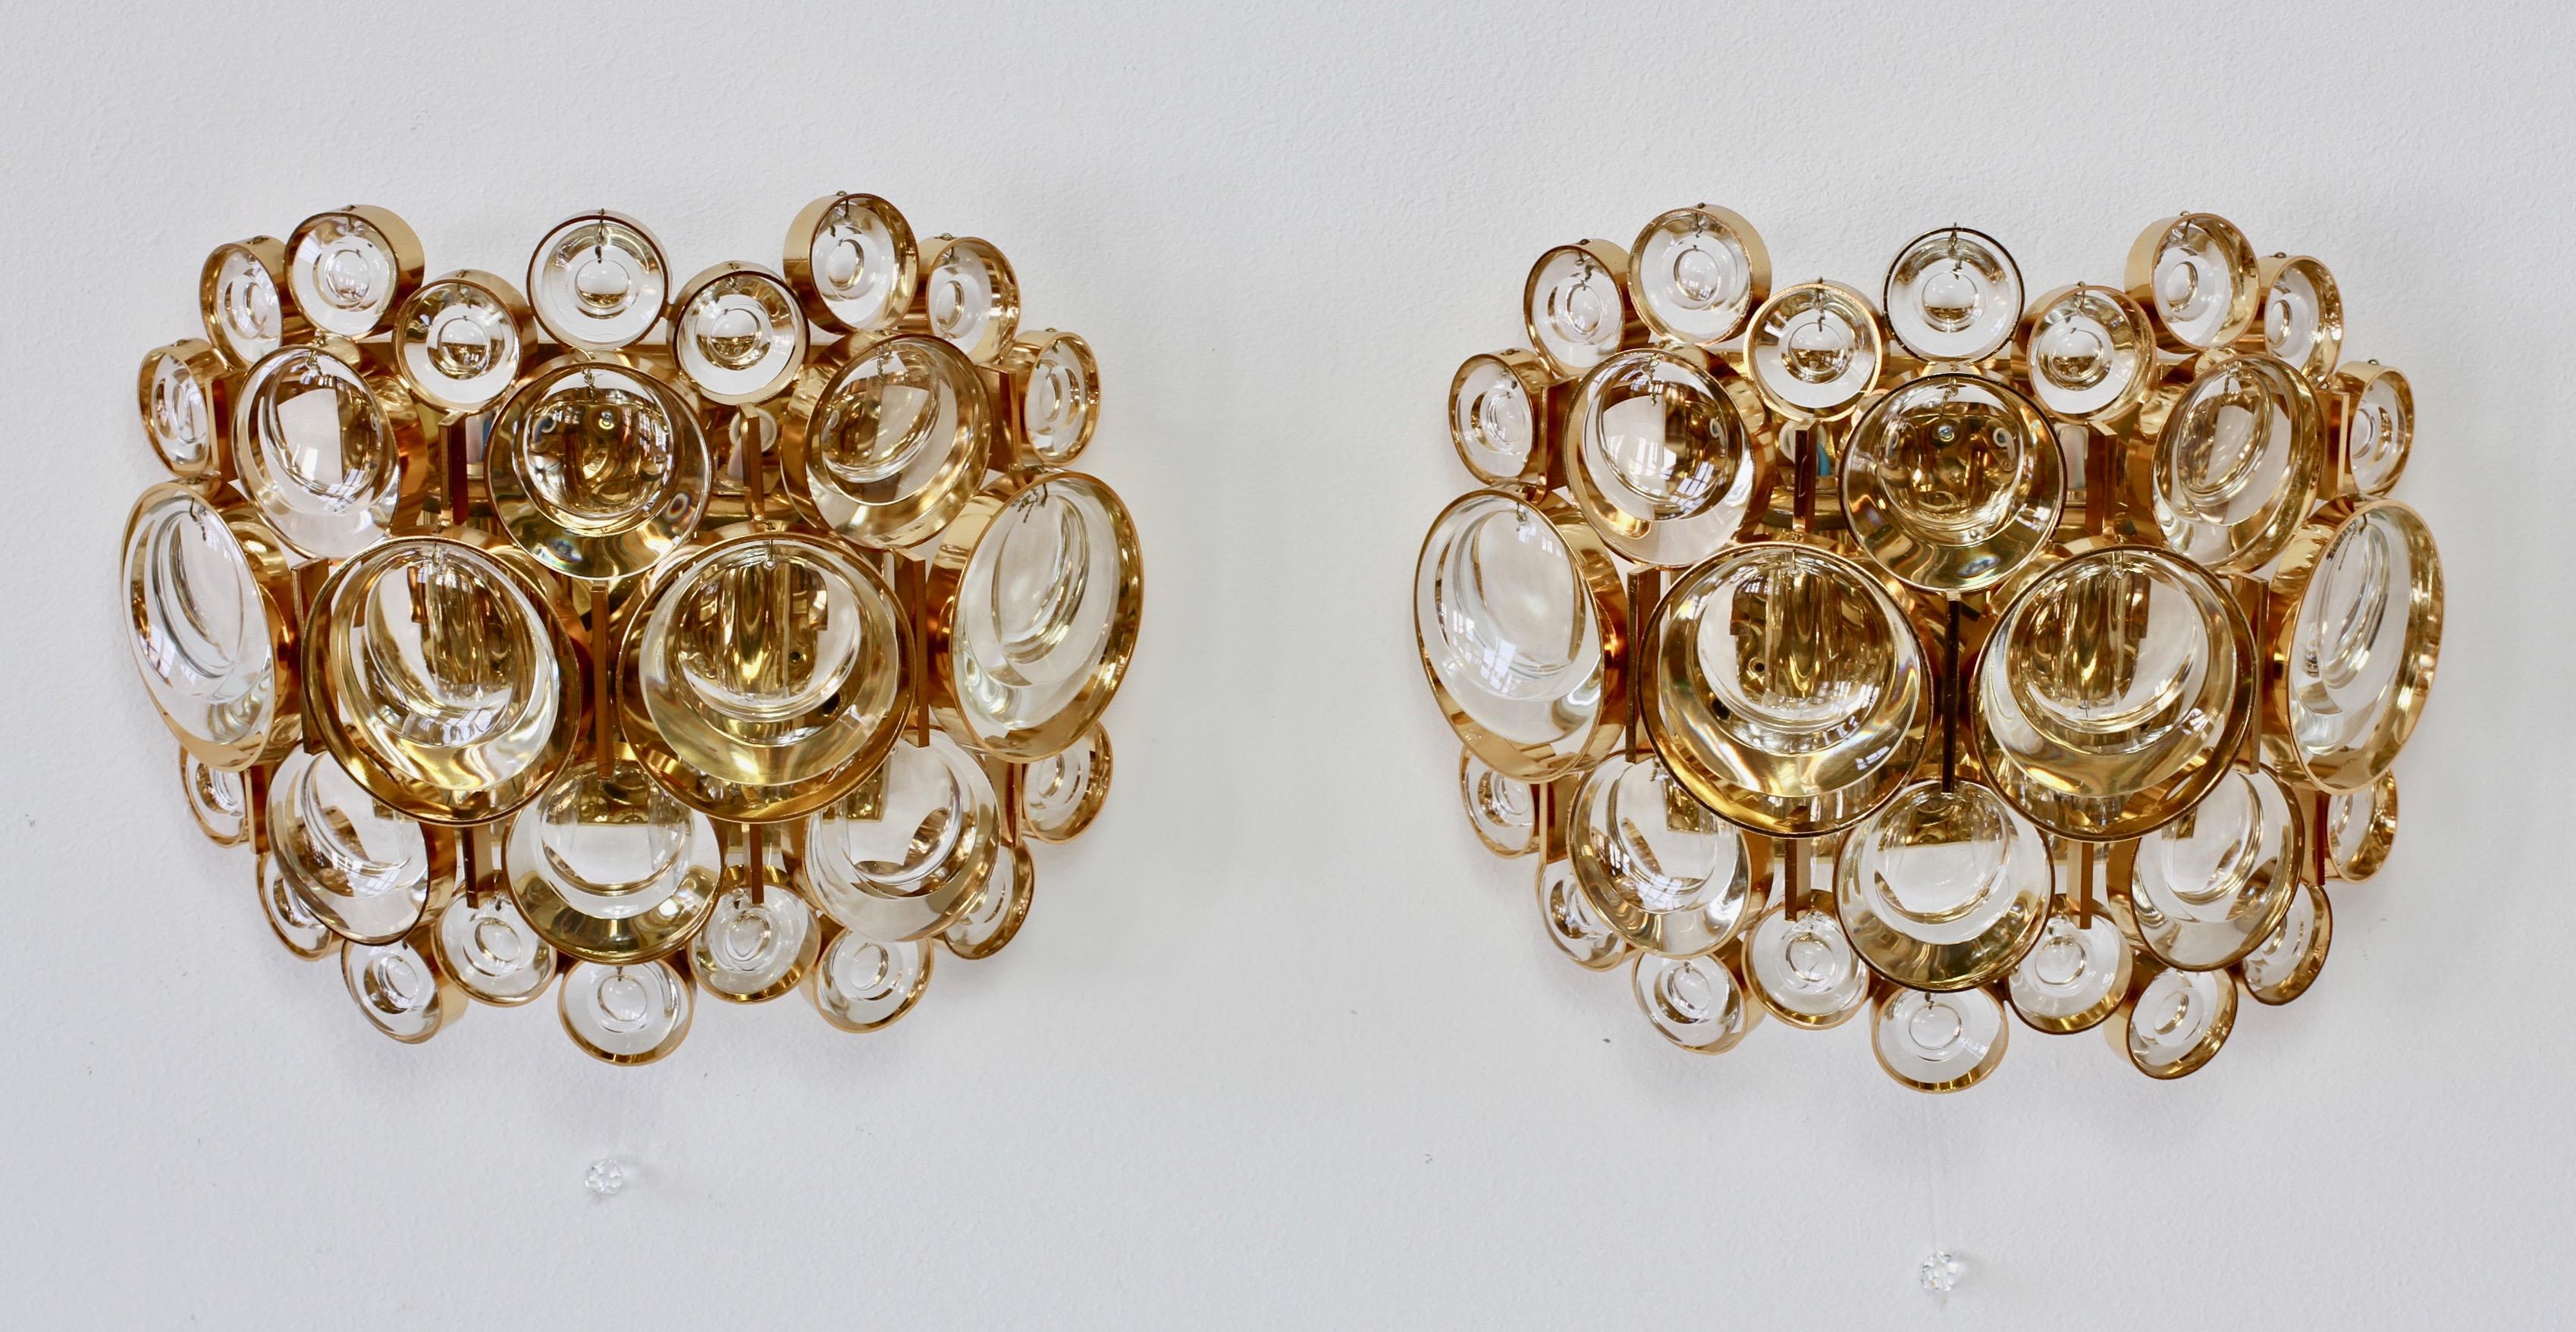 Stunning vintage midcentury pair of gilt brass and crystal glass wall-mounted lights, lamps or vanity sconces by Palwa, Germany, circa 1965-1975. Perfect for the Hollywood Regency style, there is no better combination than gold and crystal glass for